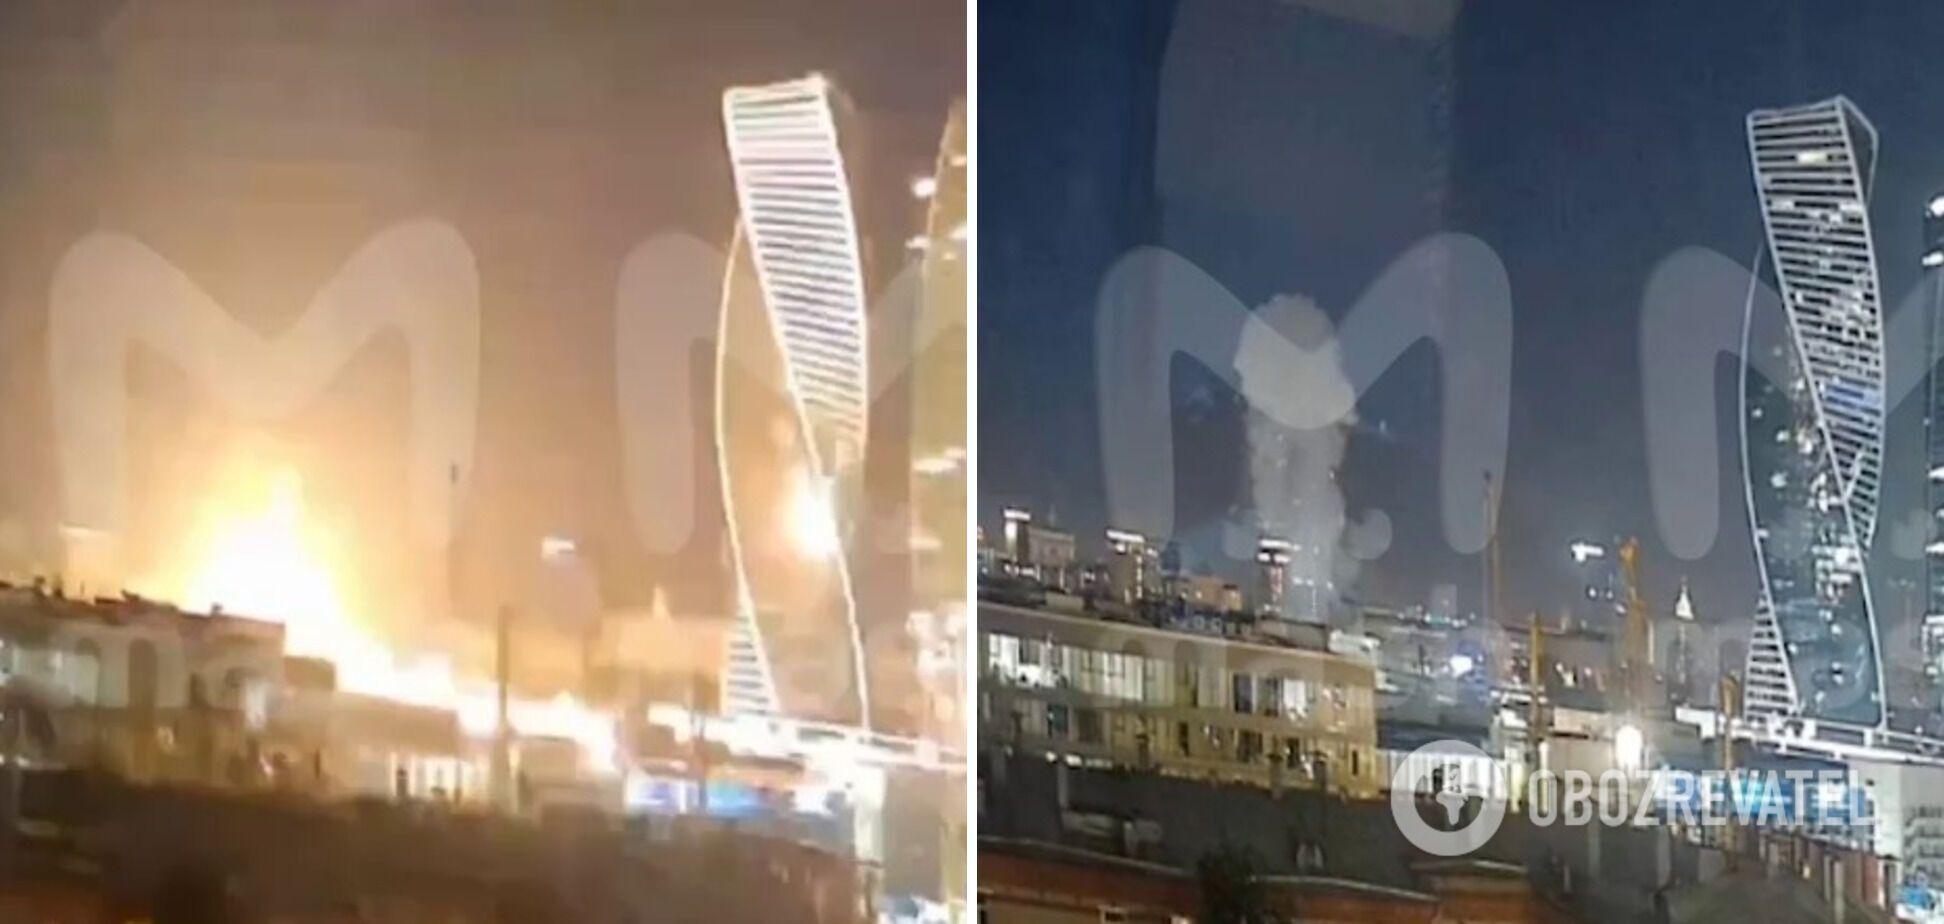 The moment of drone explosion near Moscow City caught on camera: special services were called to the scene